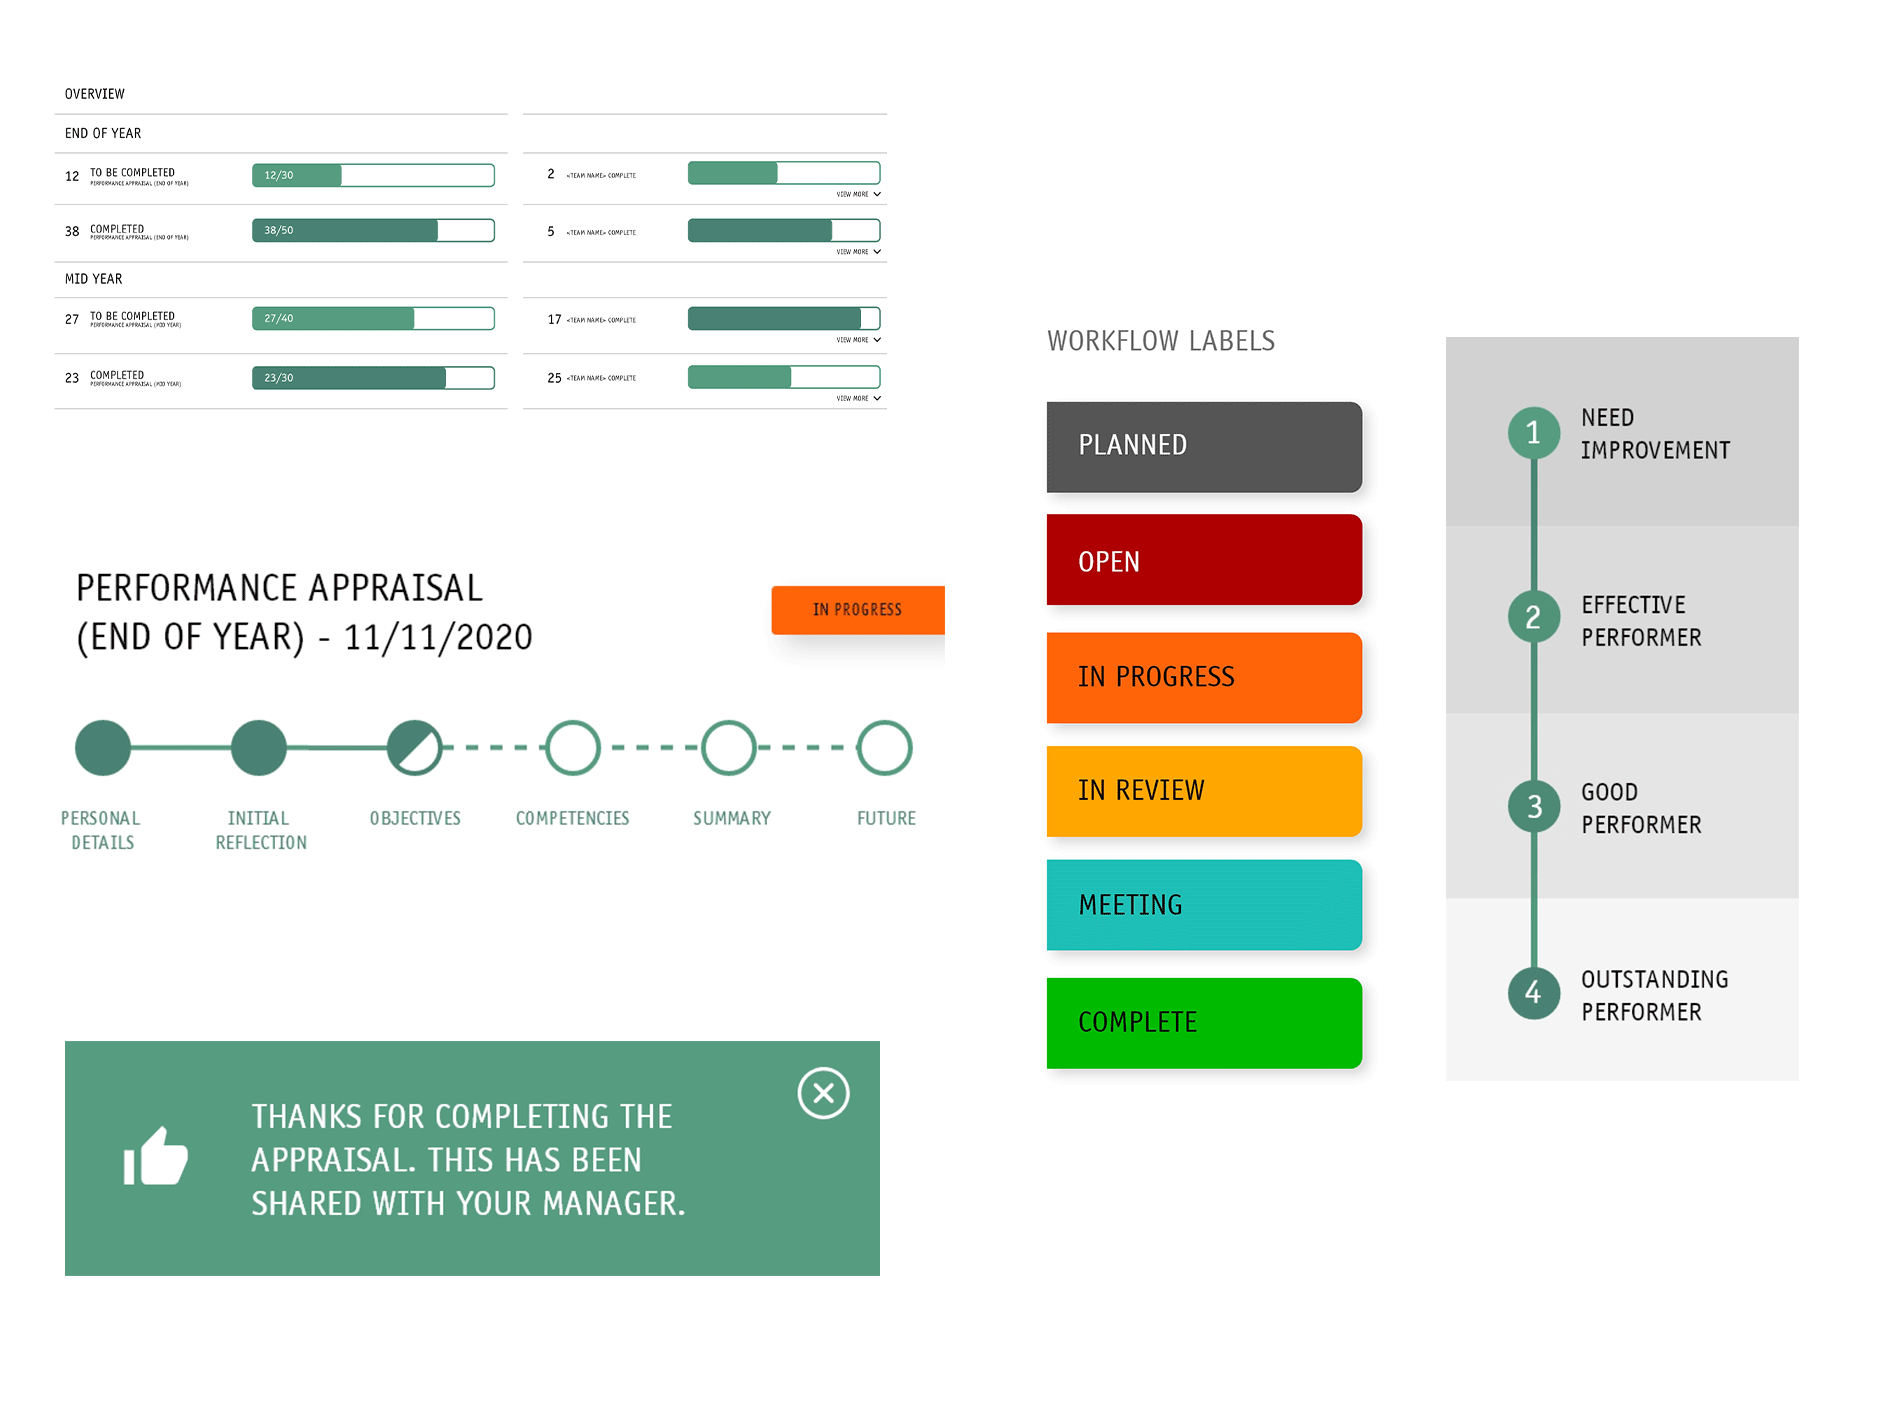 Early visual designs for digital appraisal form built in Drupal